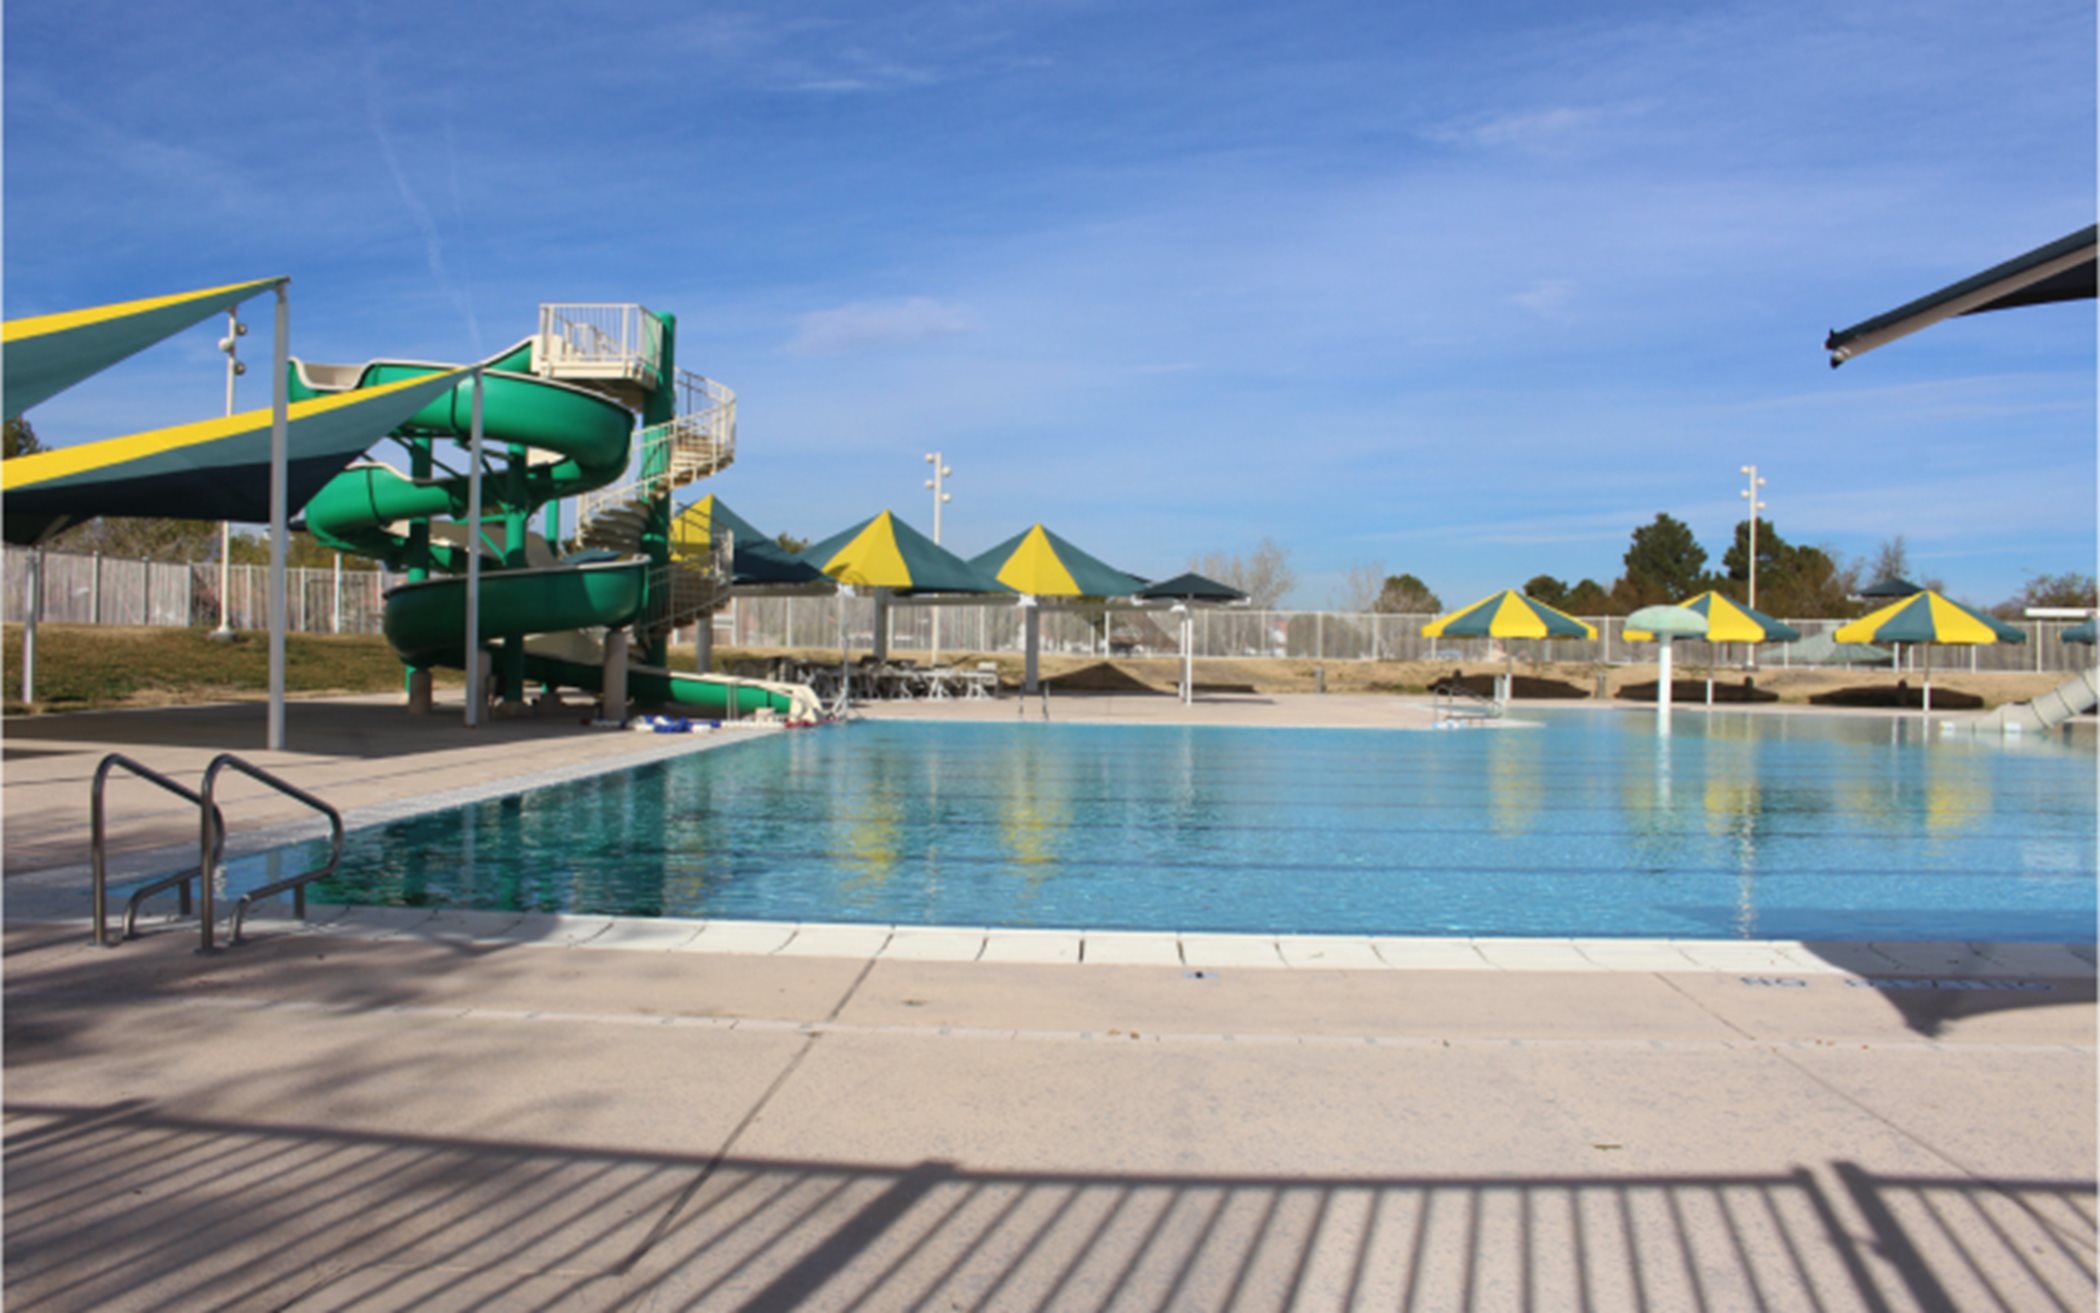 Valley Vista swimming pool features lap lanes, covered tables and a fun waterslide